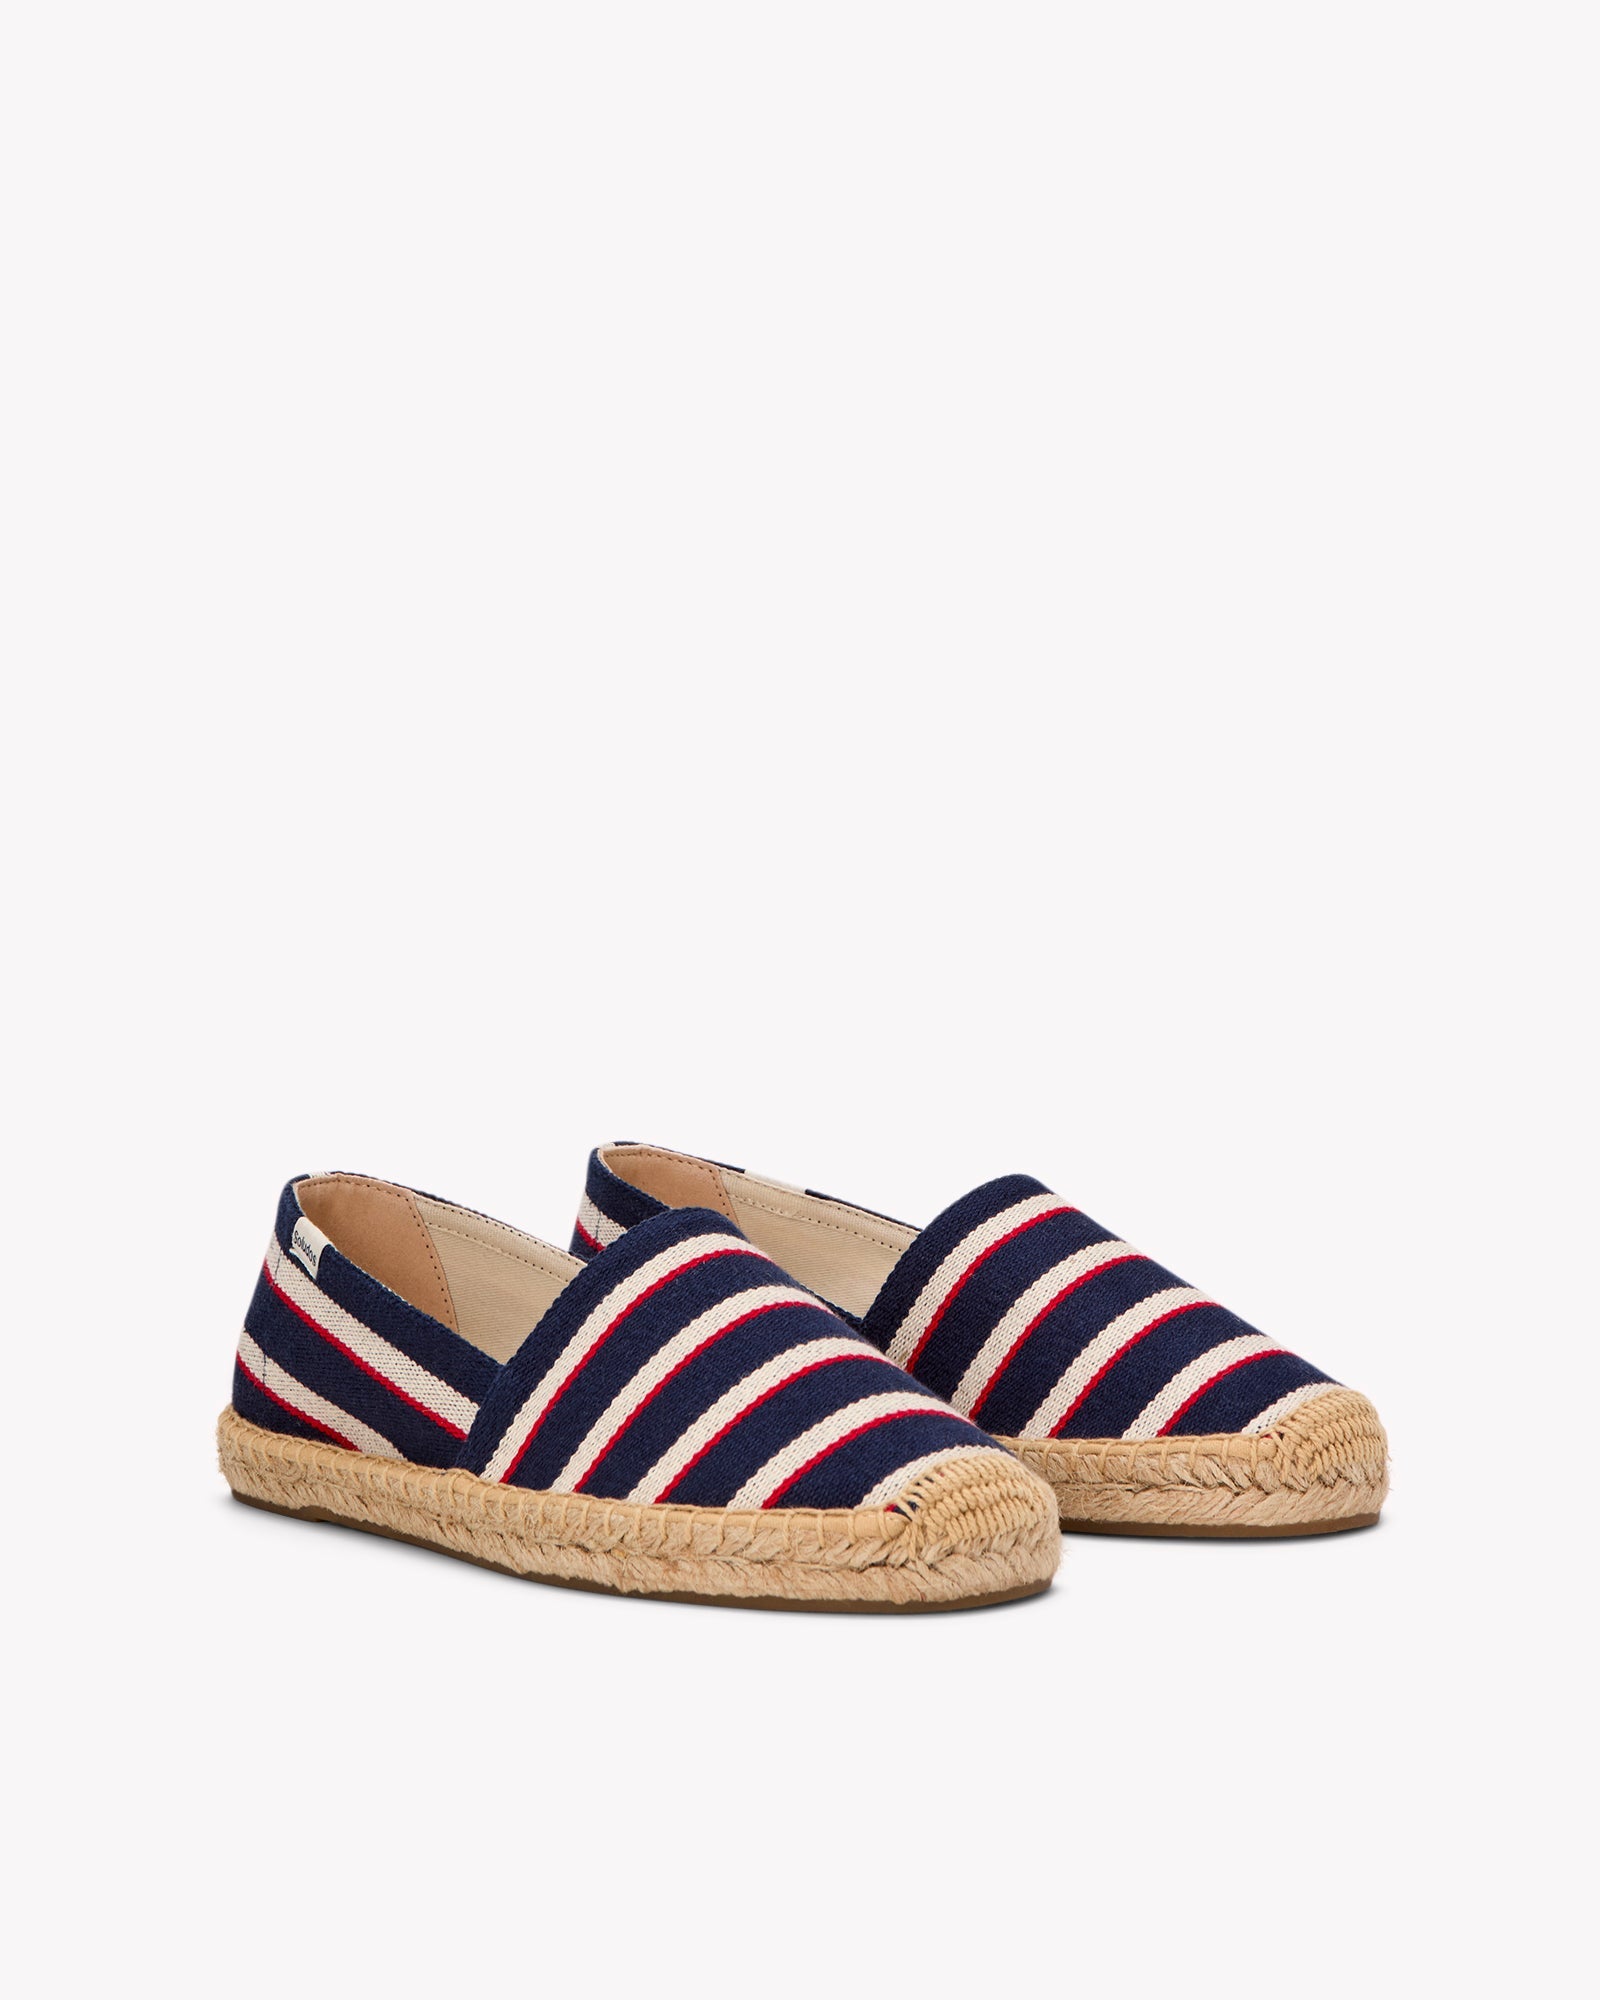 The Original Espadrille - Classic Stripes - Navy / Ivory / Red - Women's